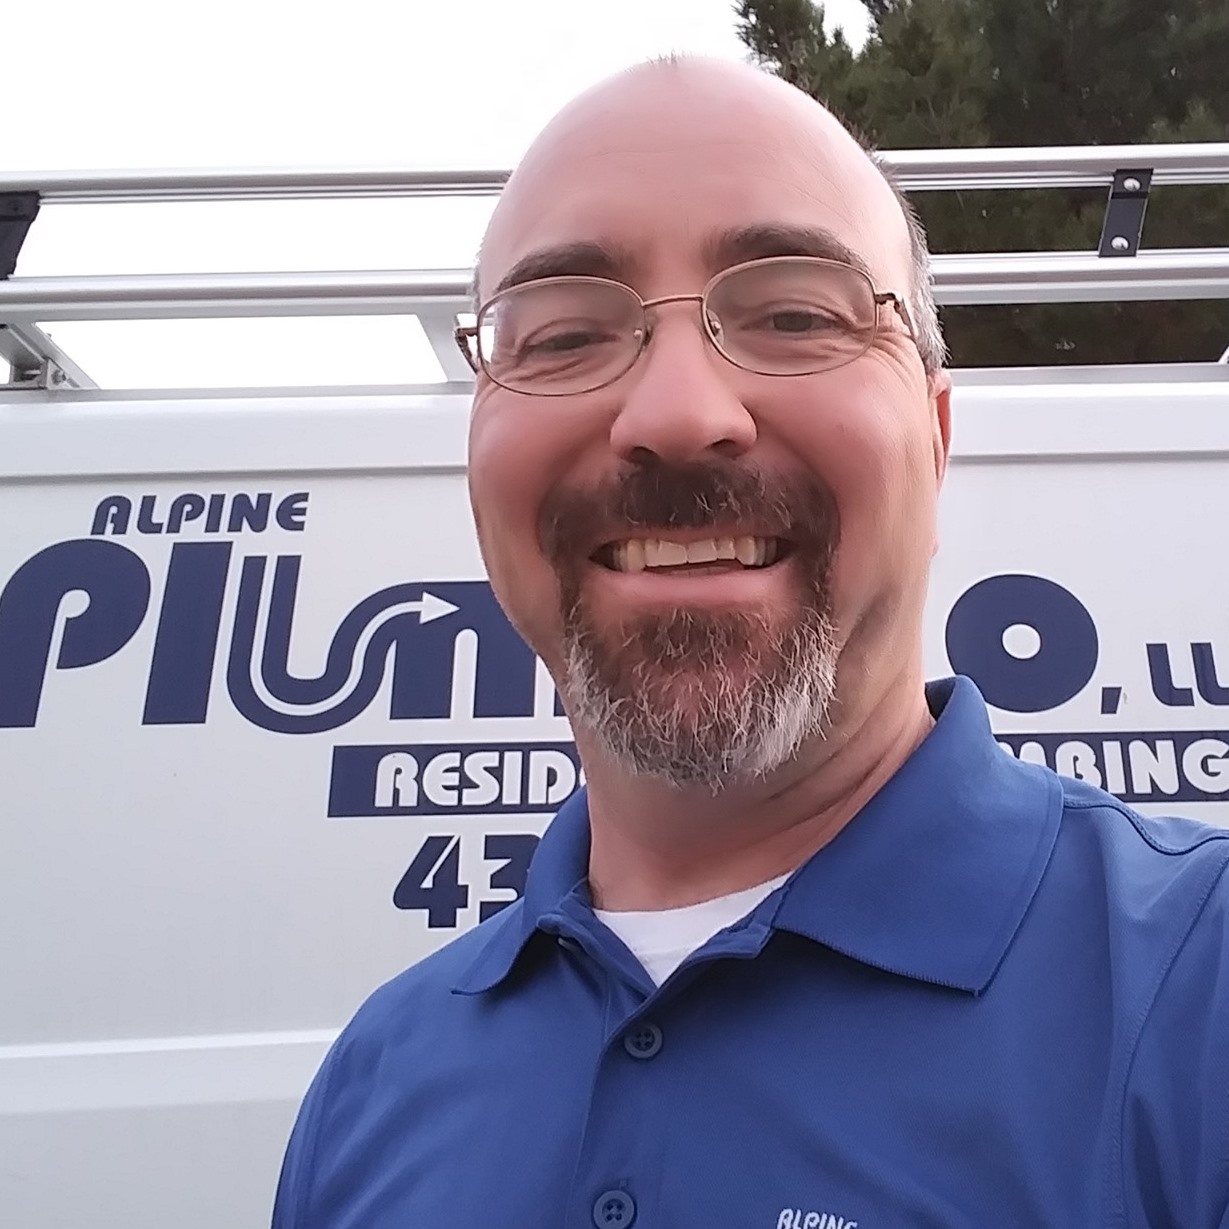 Alpine Plumbing (Serving Knox County TX Area) 909 S E 3rd St, Knox City Texas 79529